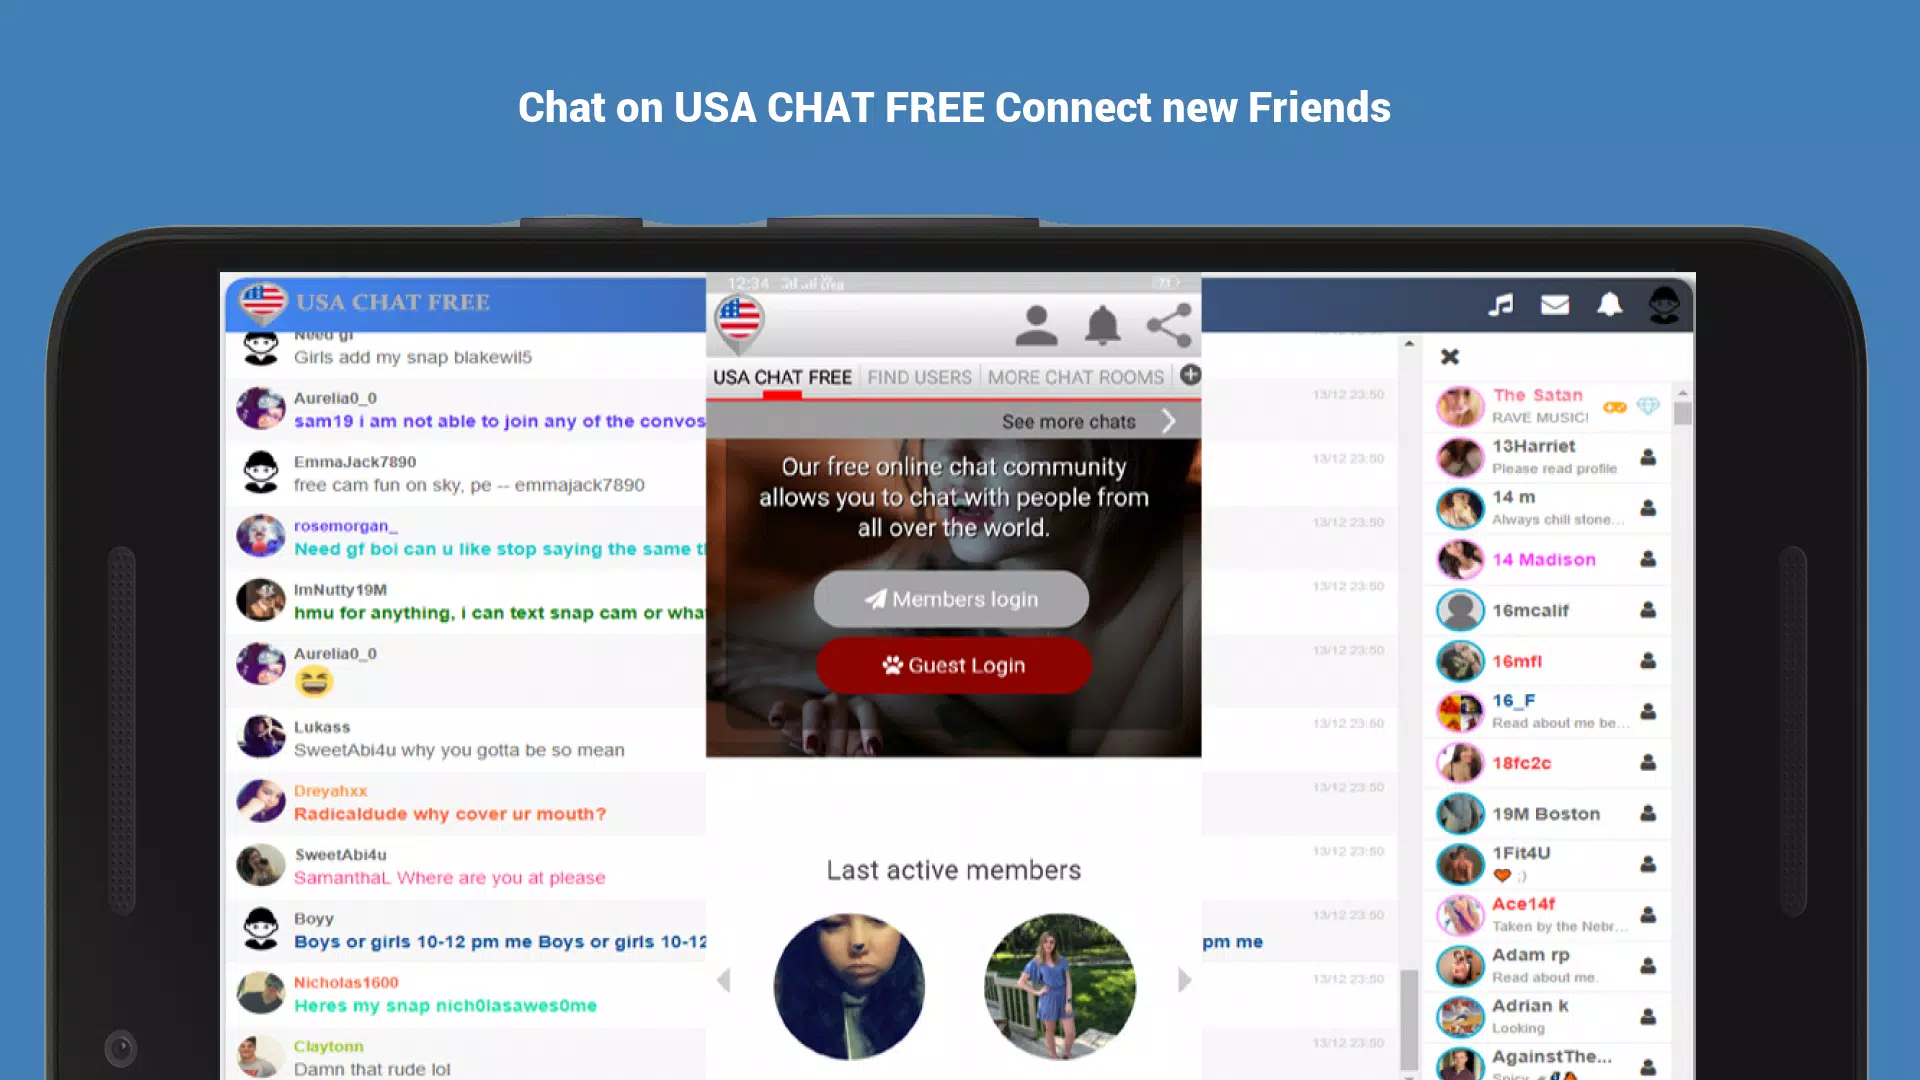 Live chat f-stop Free Live